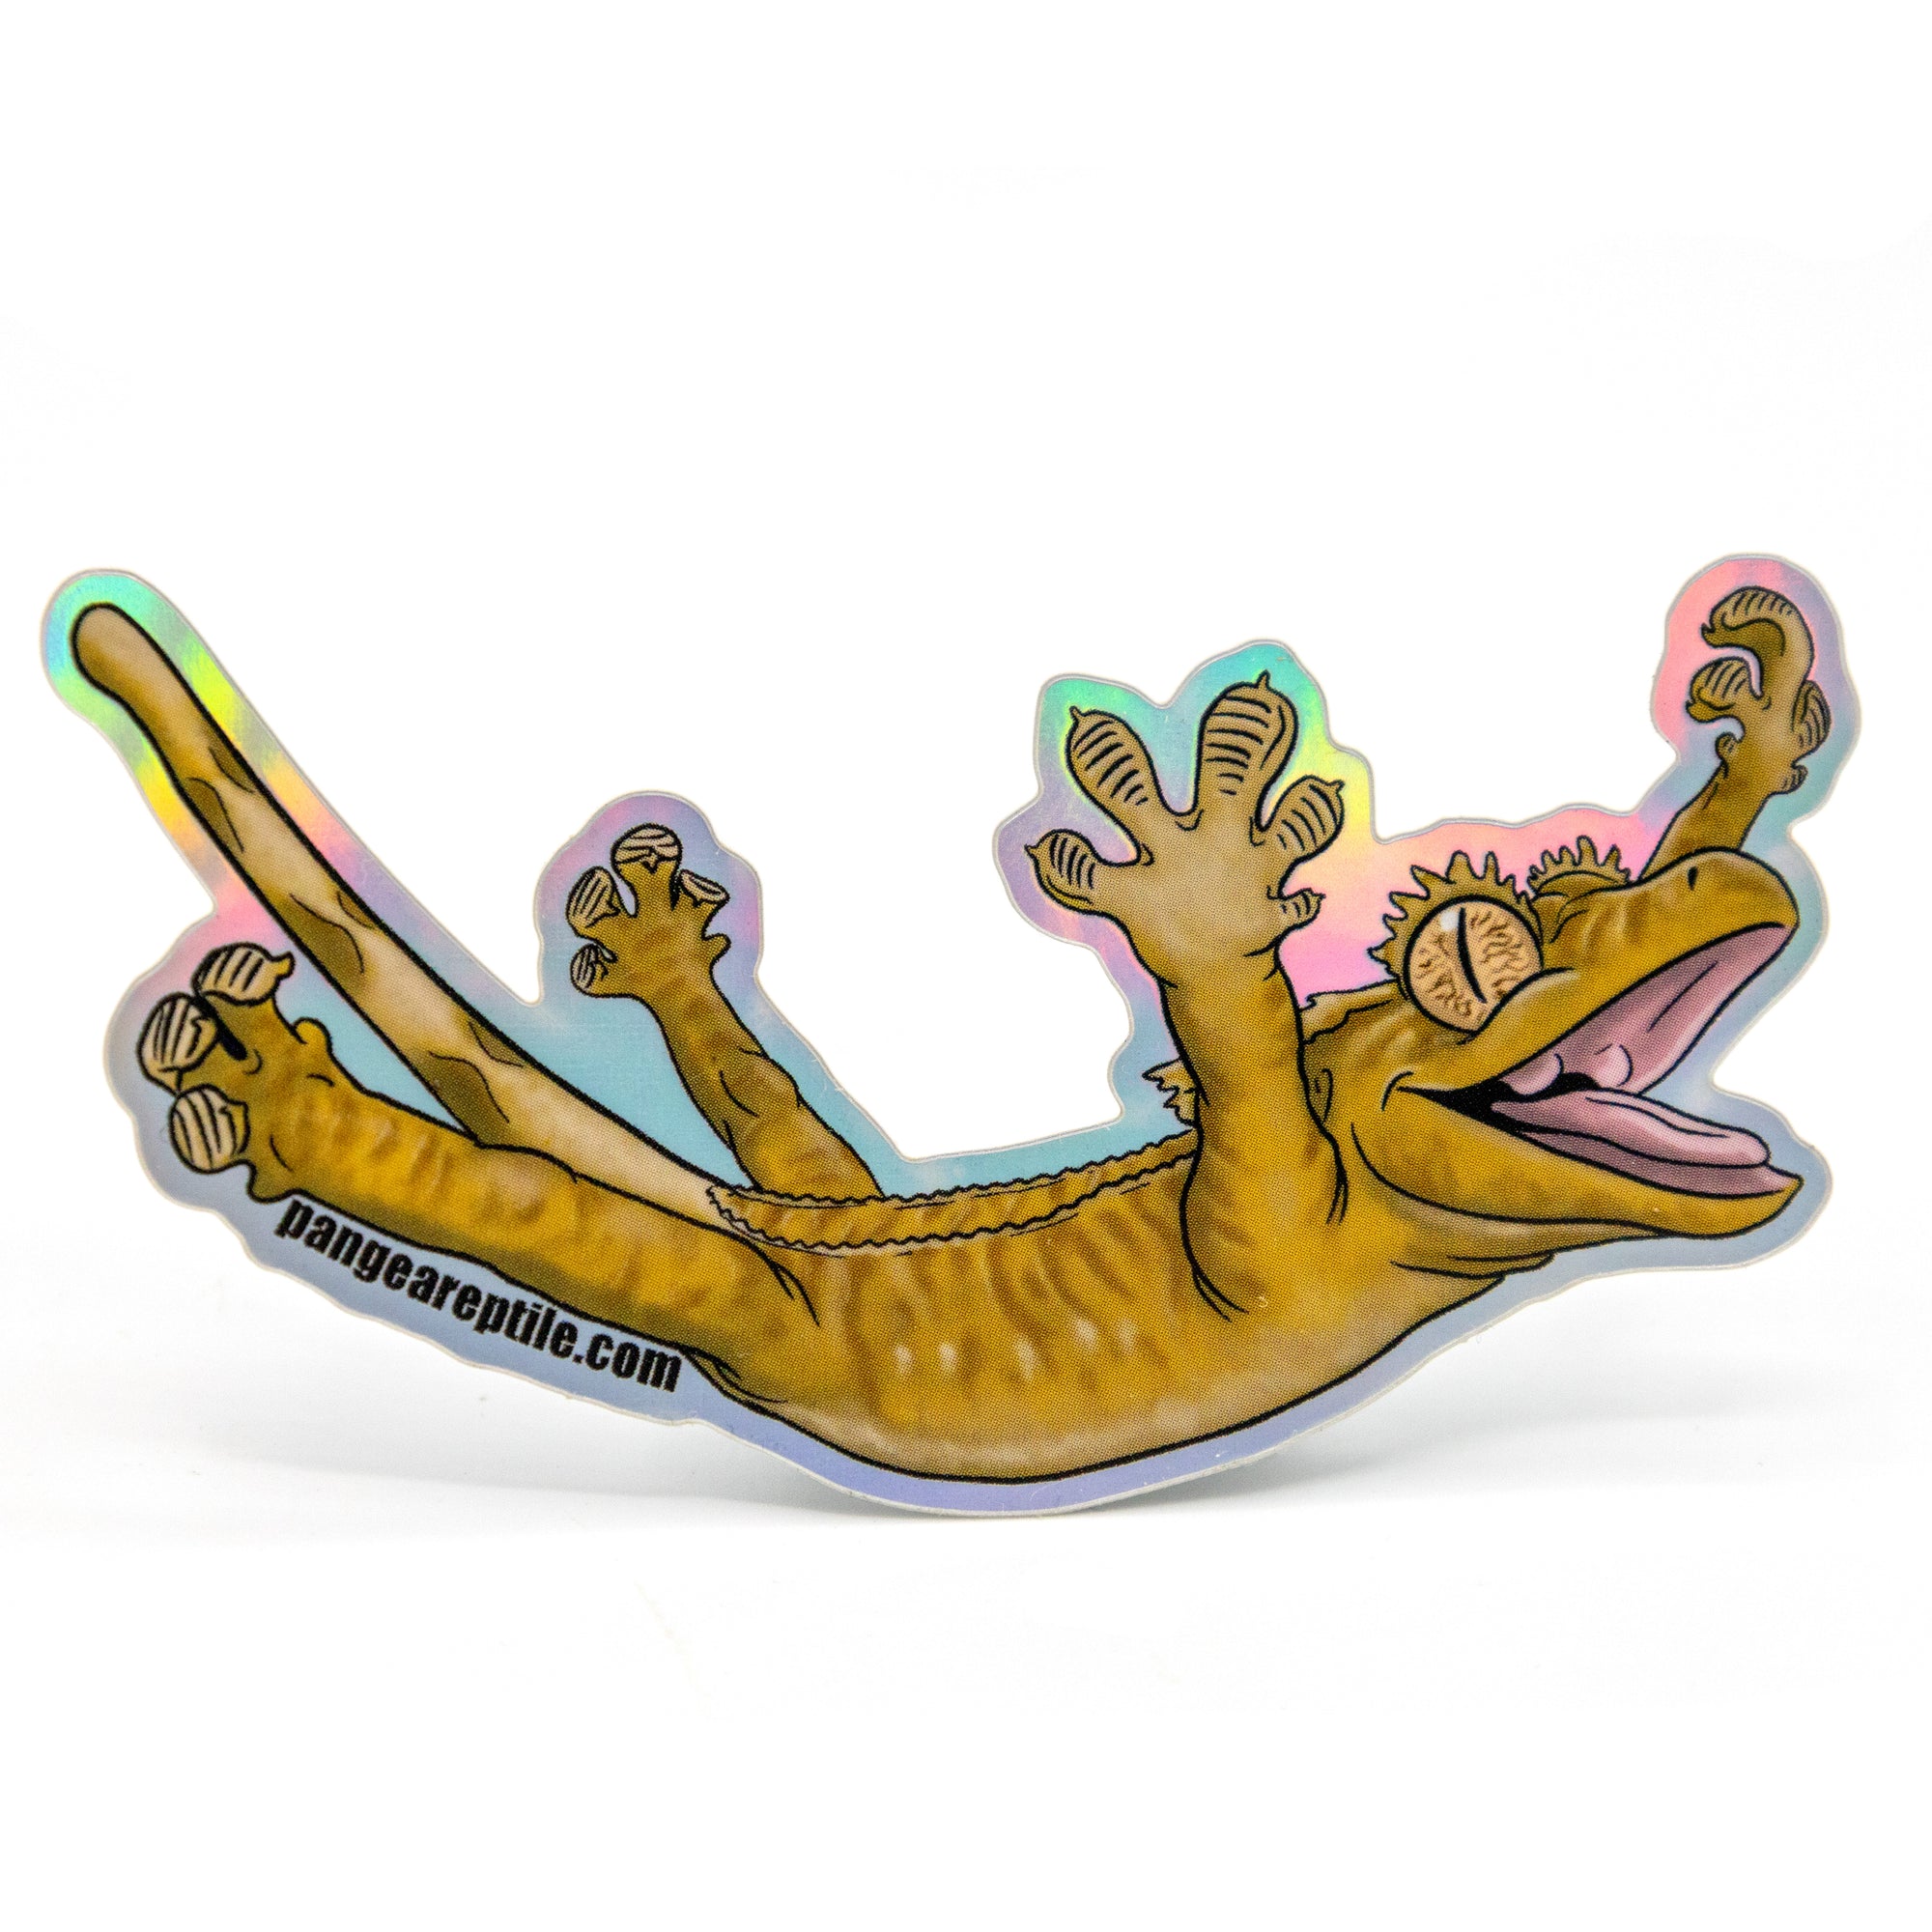 Leaping Crested Gecko Holographic Sticker hovering on white